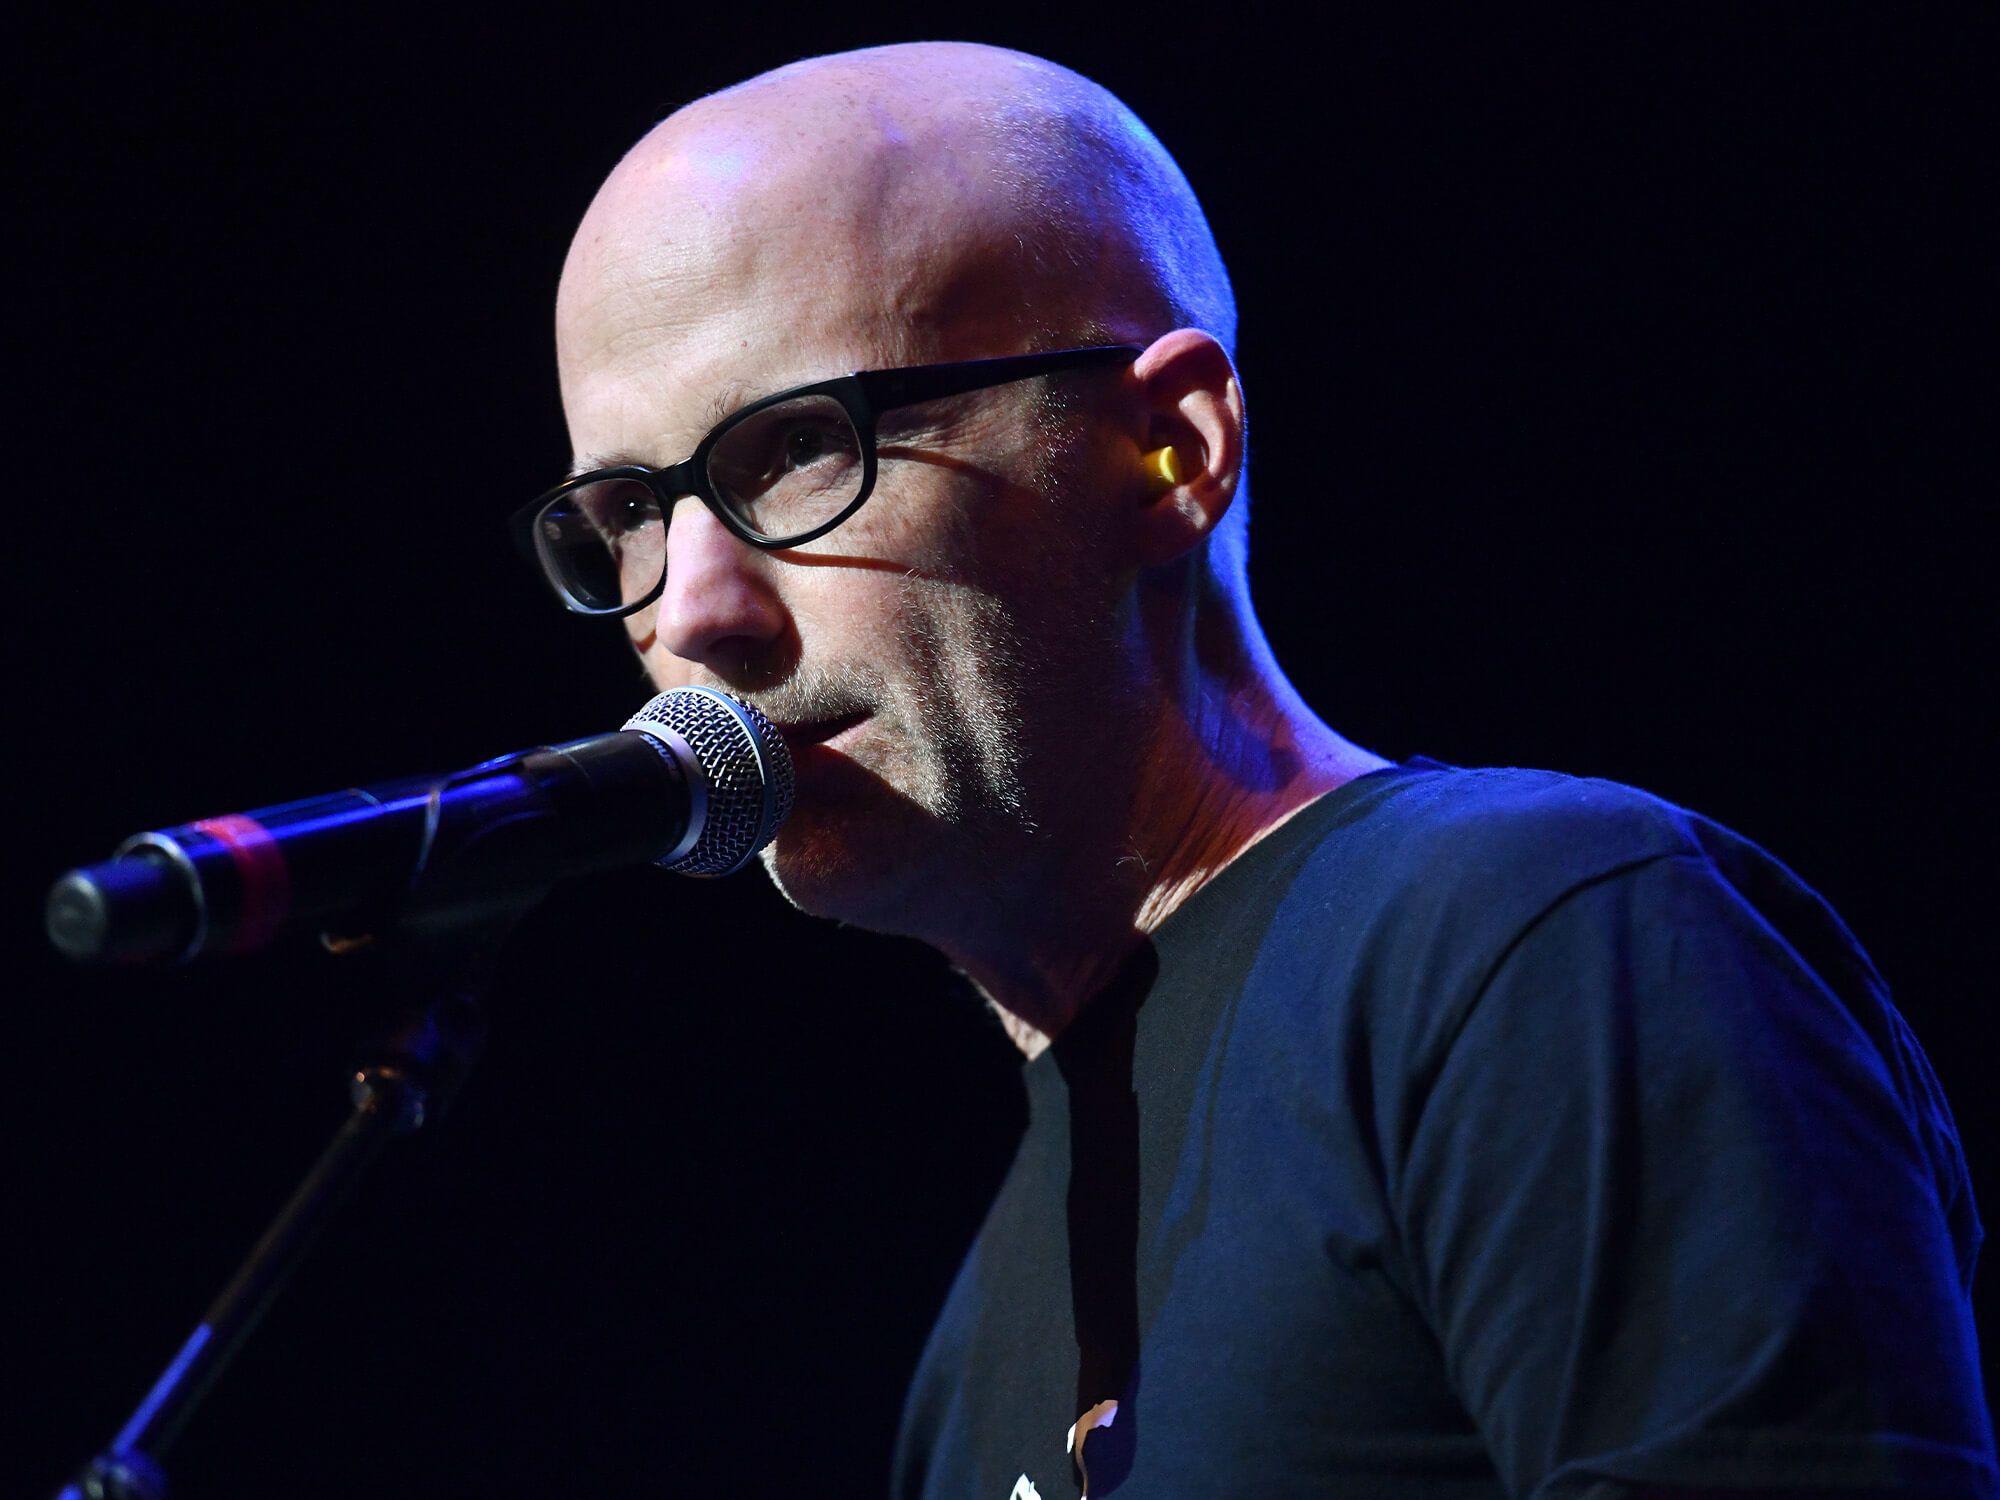 A close up photo of Moby singing into a mic on stage.